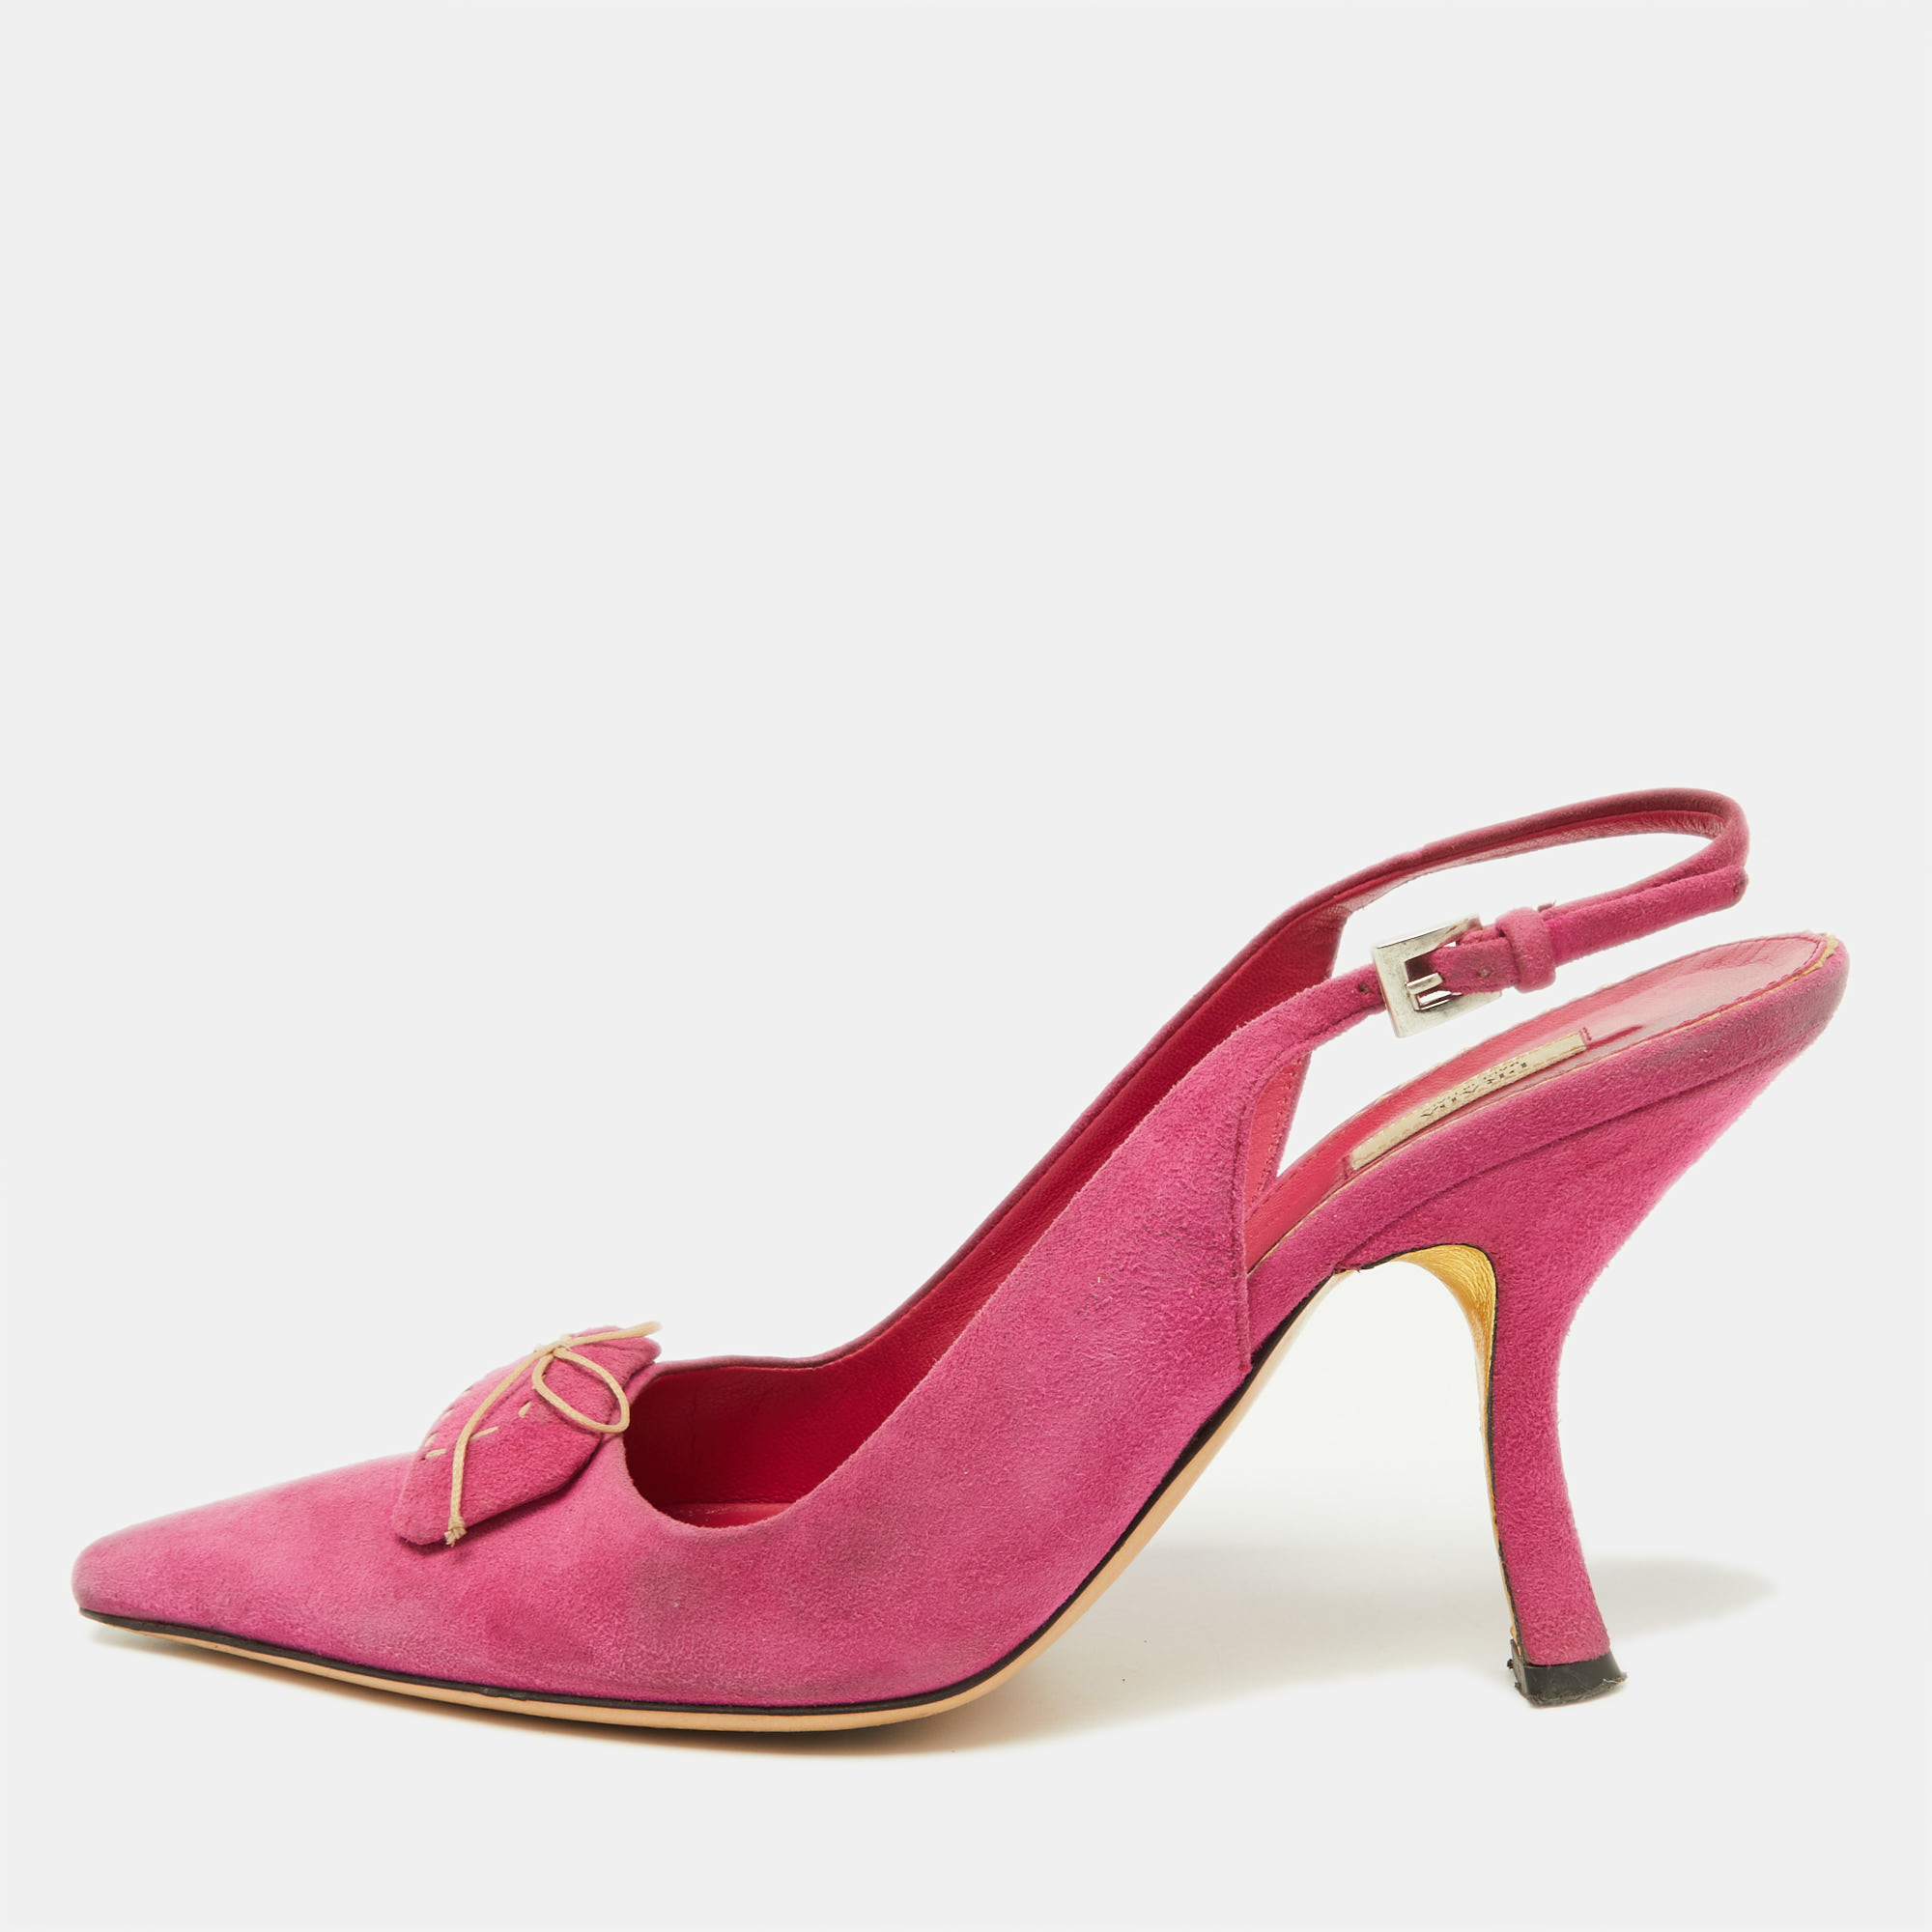 Prada pink suede bow pointed toe slingback pumps size 37